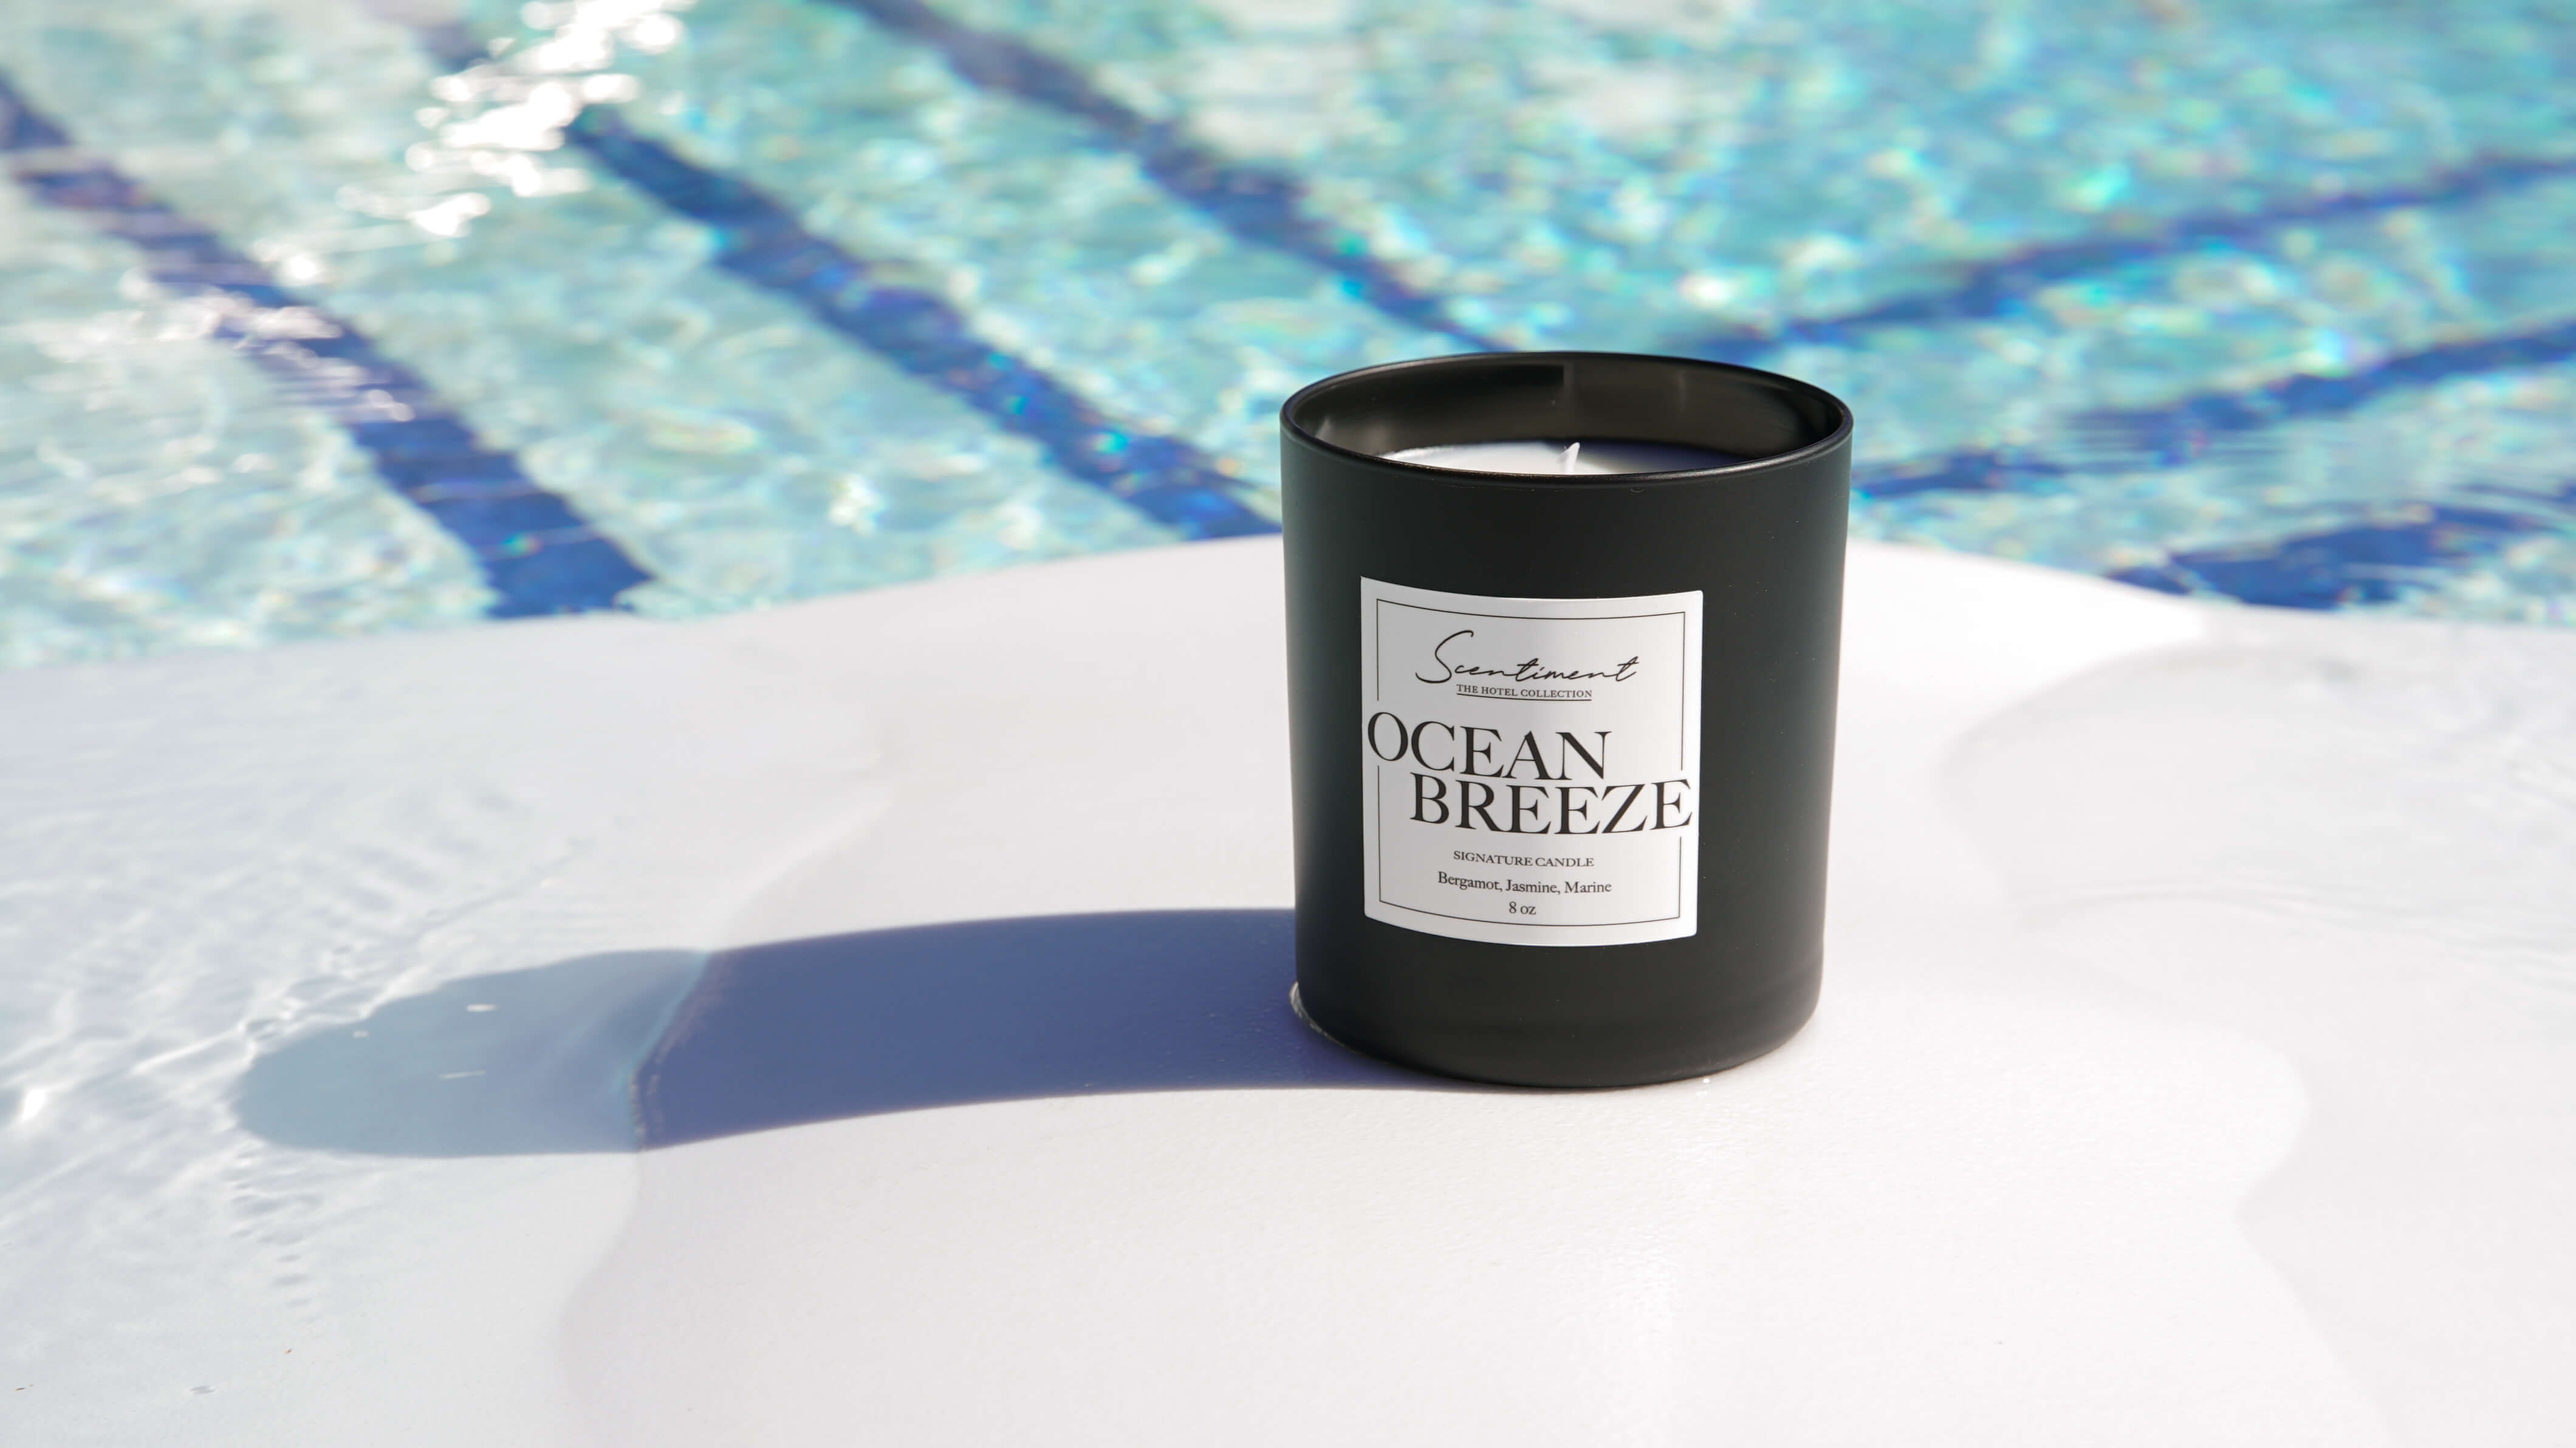 Ocean Breeze Candle Inspired by Ritz Carlton® Scent Poolside